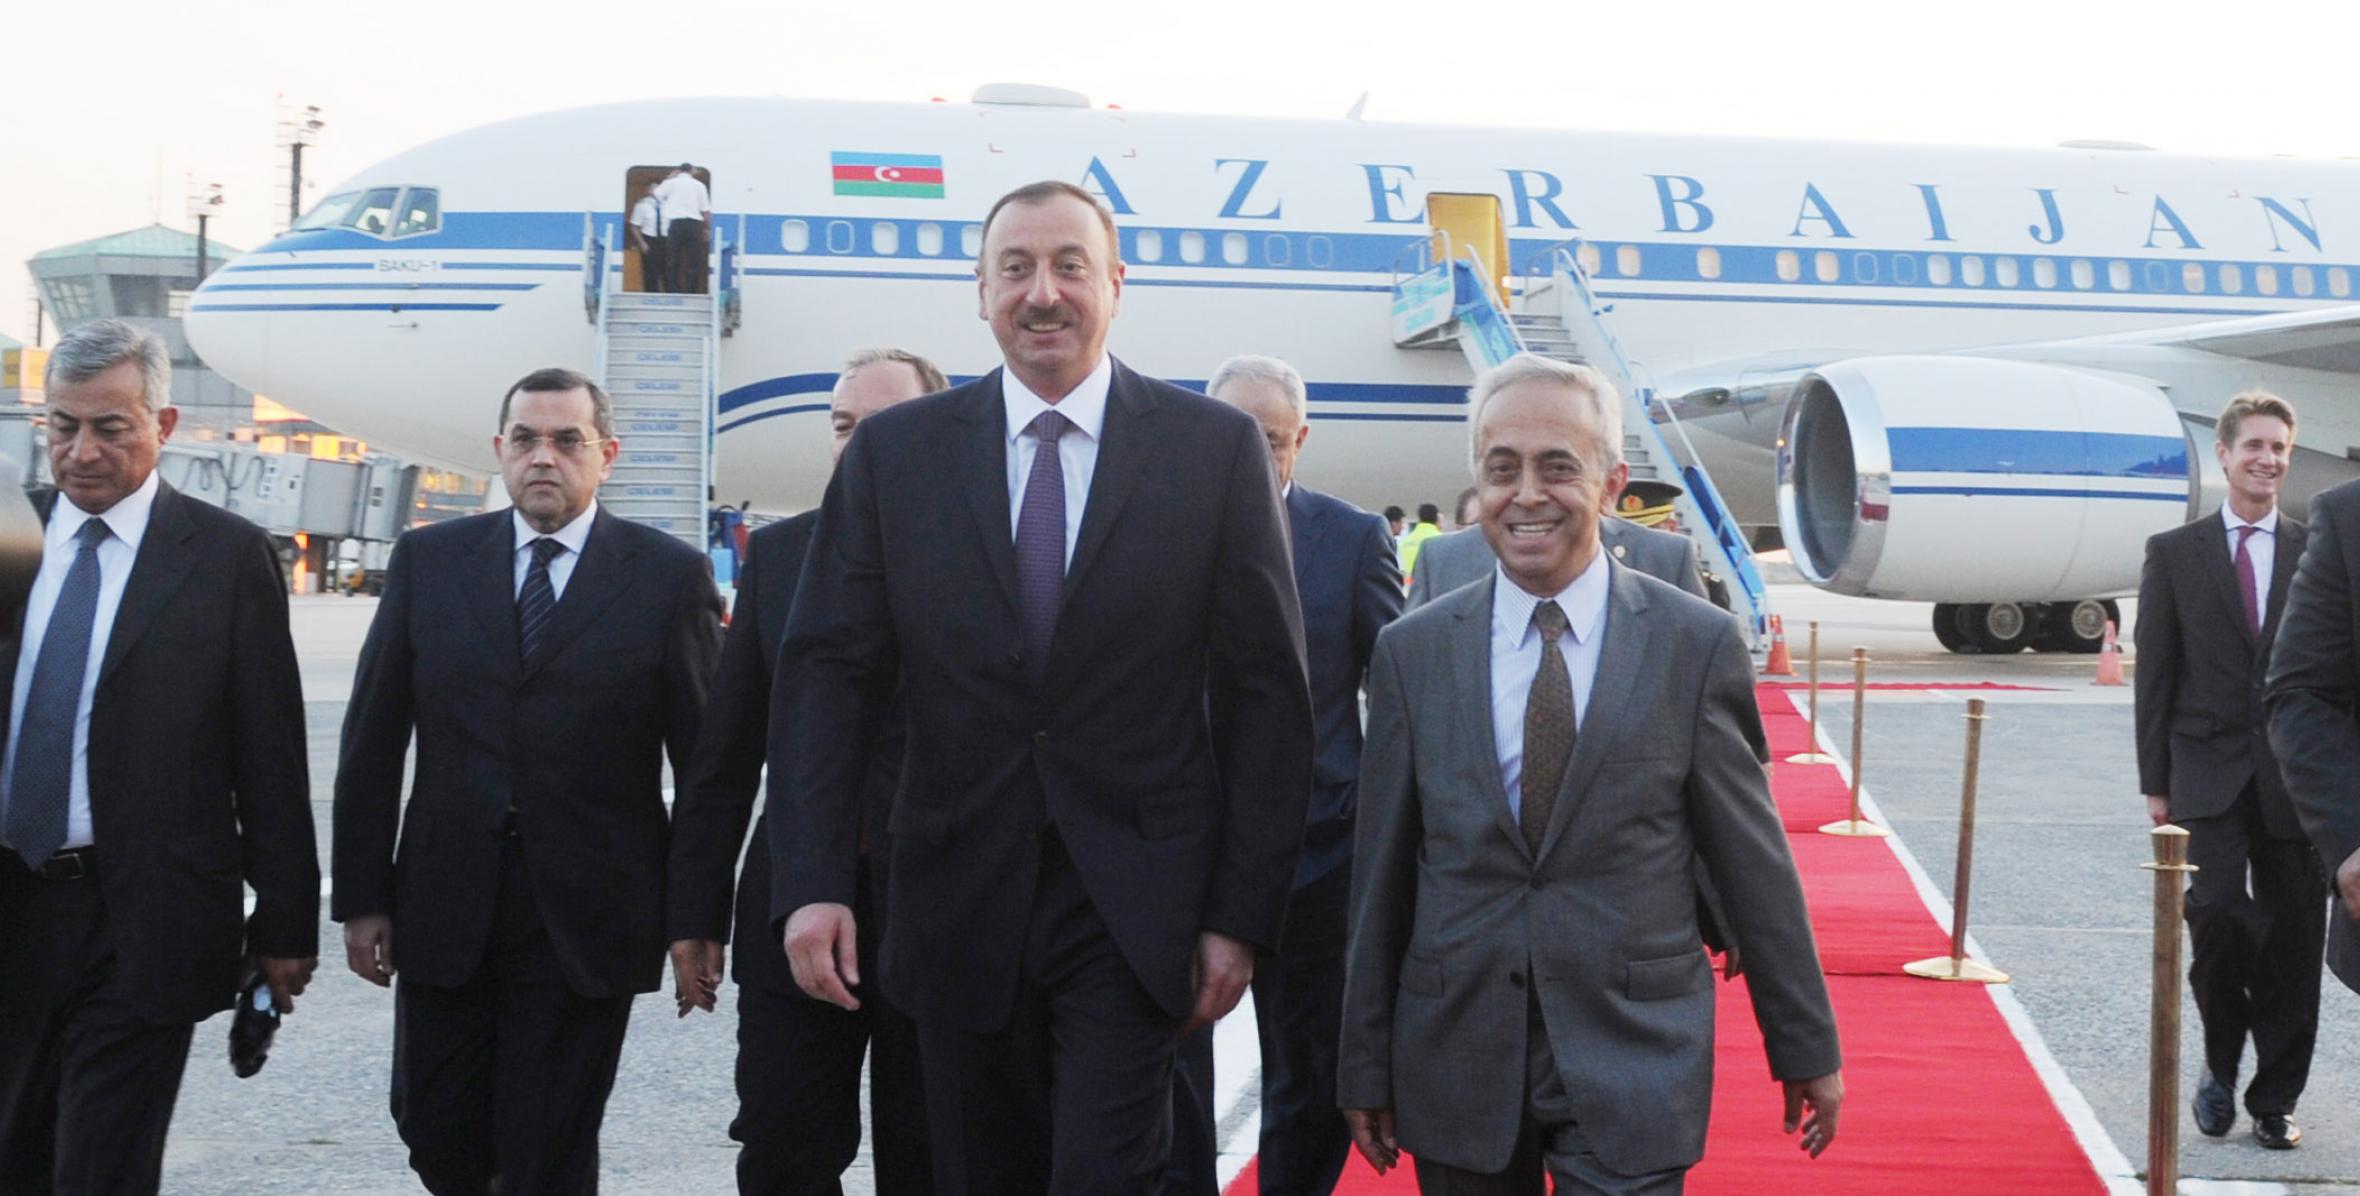 Ilham Aliyev arrived in Istanbul, Turkey for a working visit